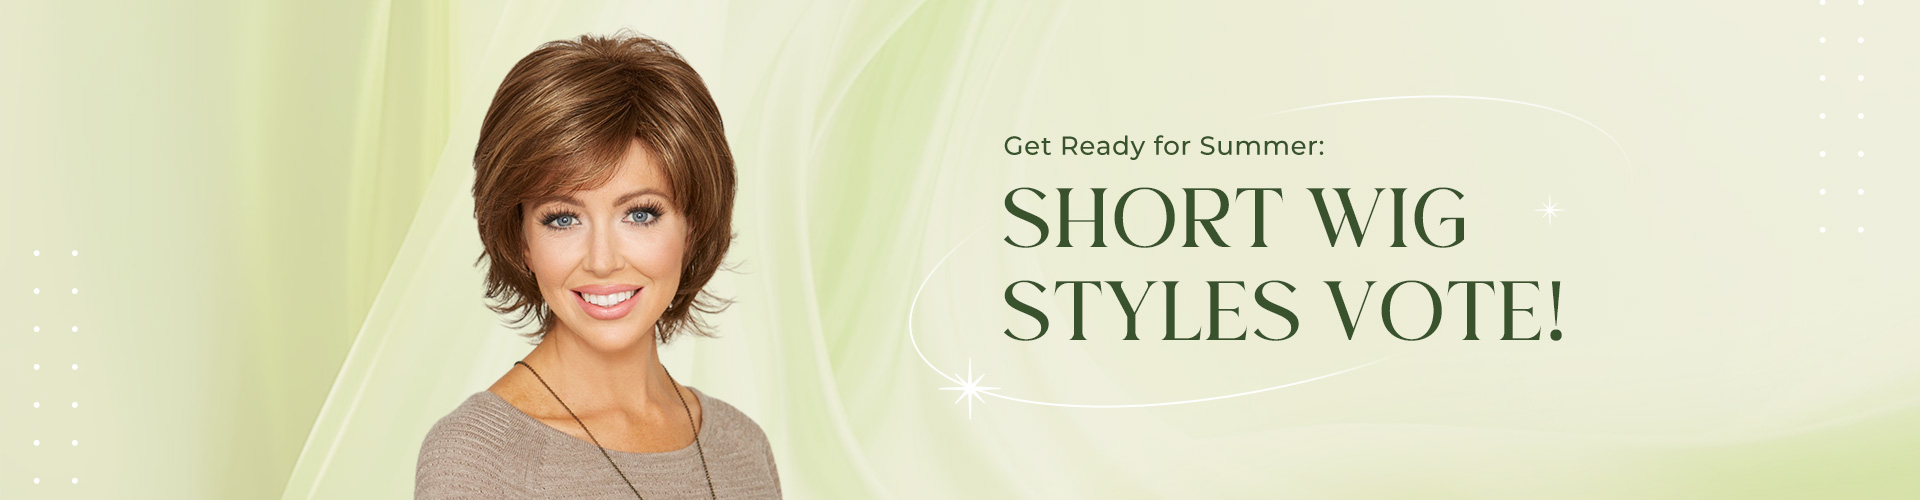 Get Ready for Summer: Short Wig Styles Vote!